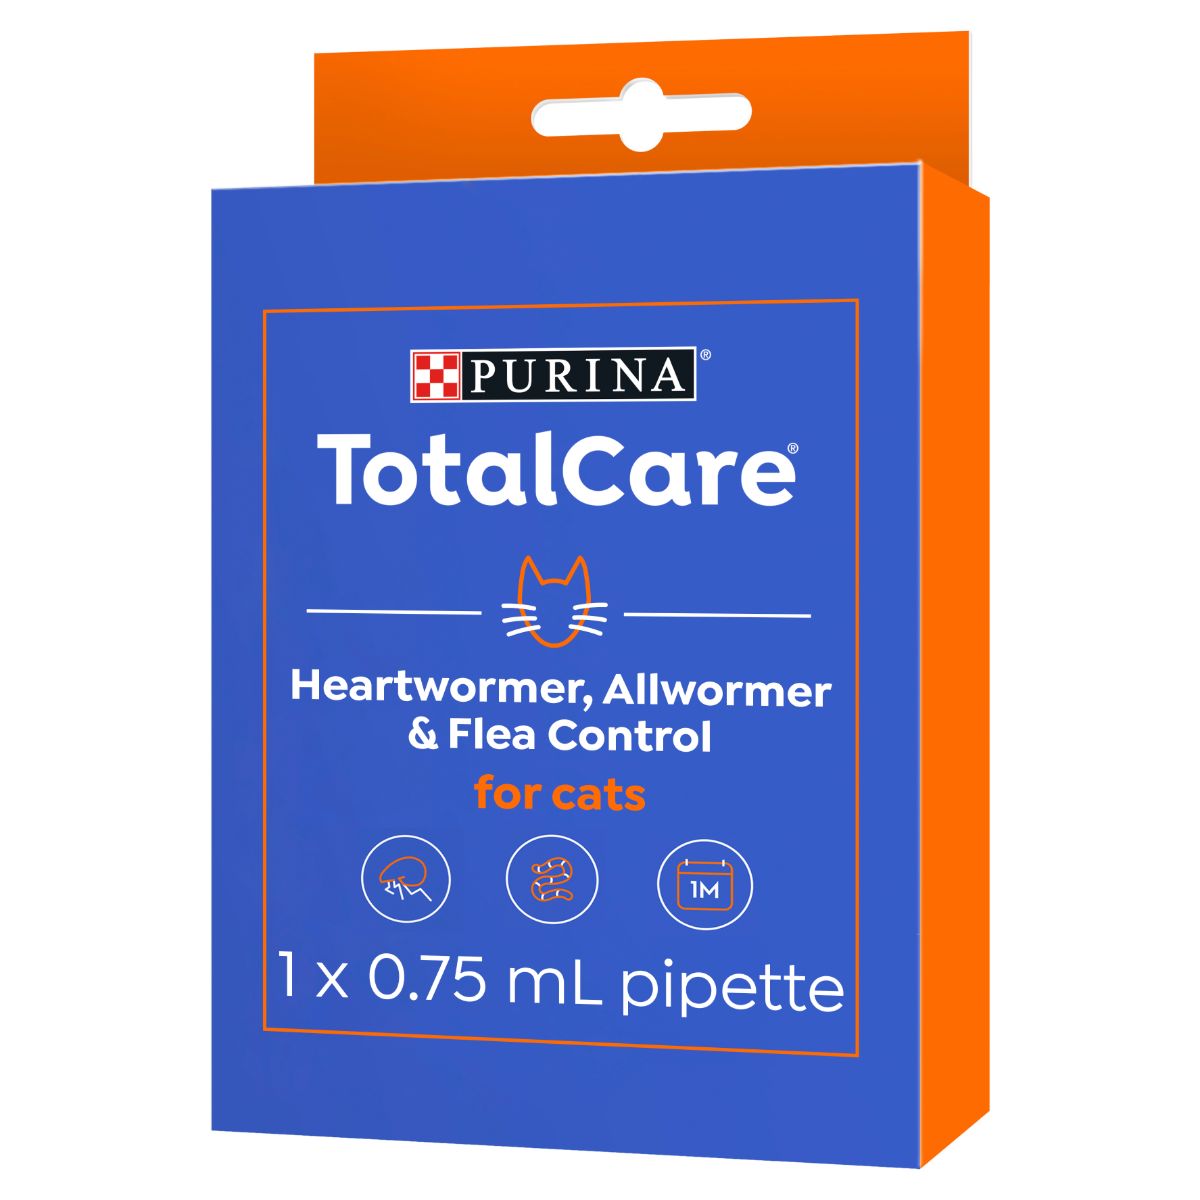 Purina Total Care Heartwormer, Allwormer & Flea Control for Cats 2.6 - 7.5kg